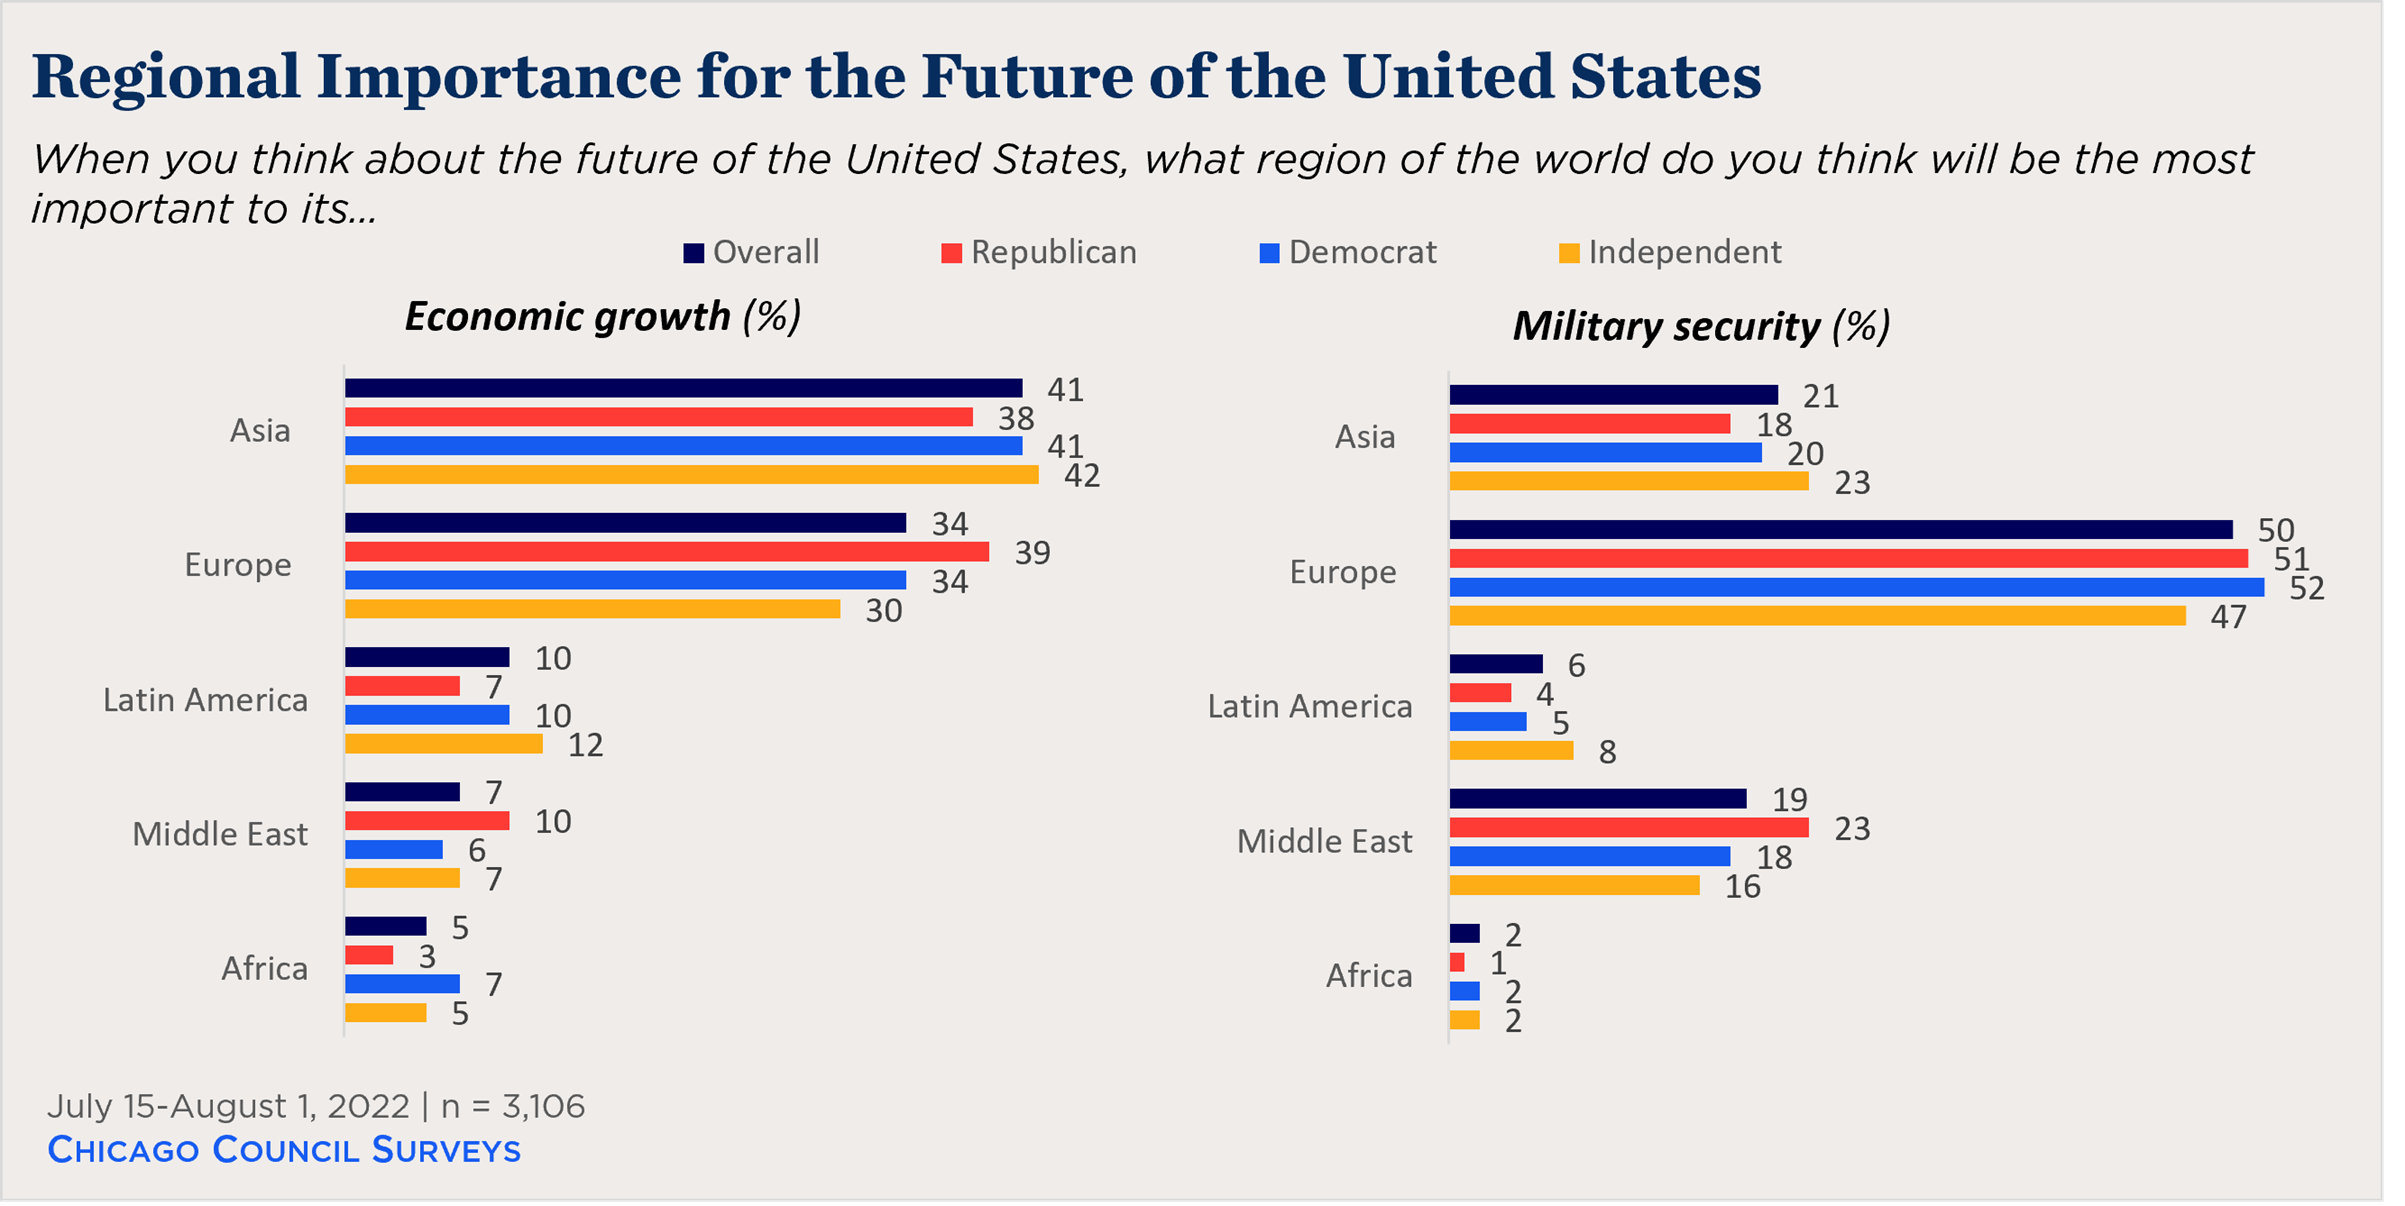 bar chart showing partisan views on regions important to the US' future